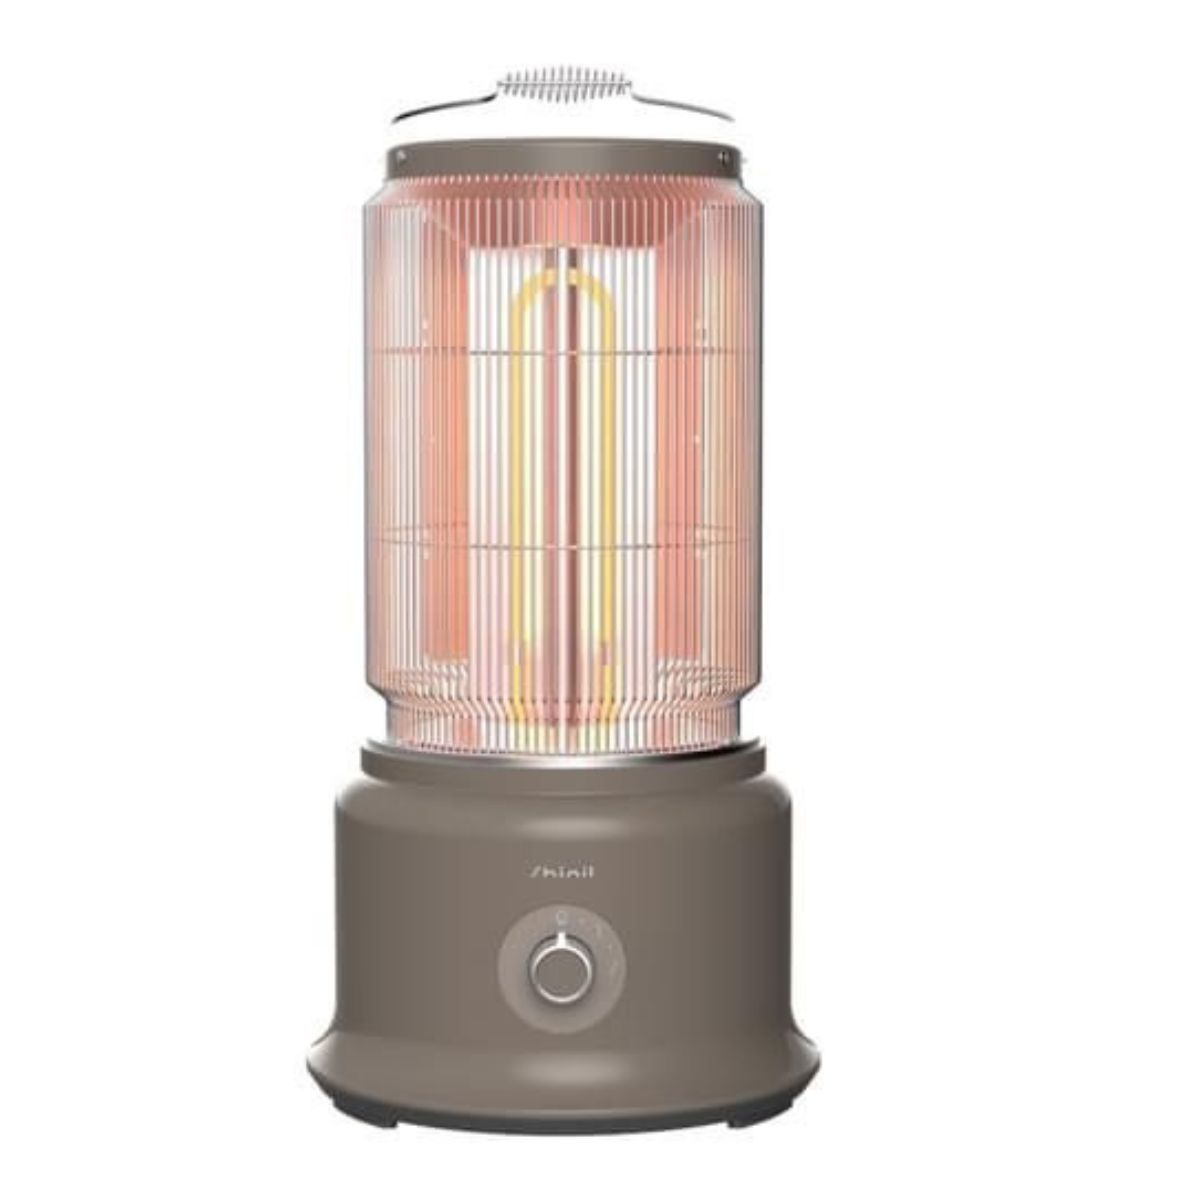 New Day Shinil - Cylindrical Carbon Heater - Light Brown